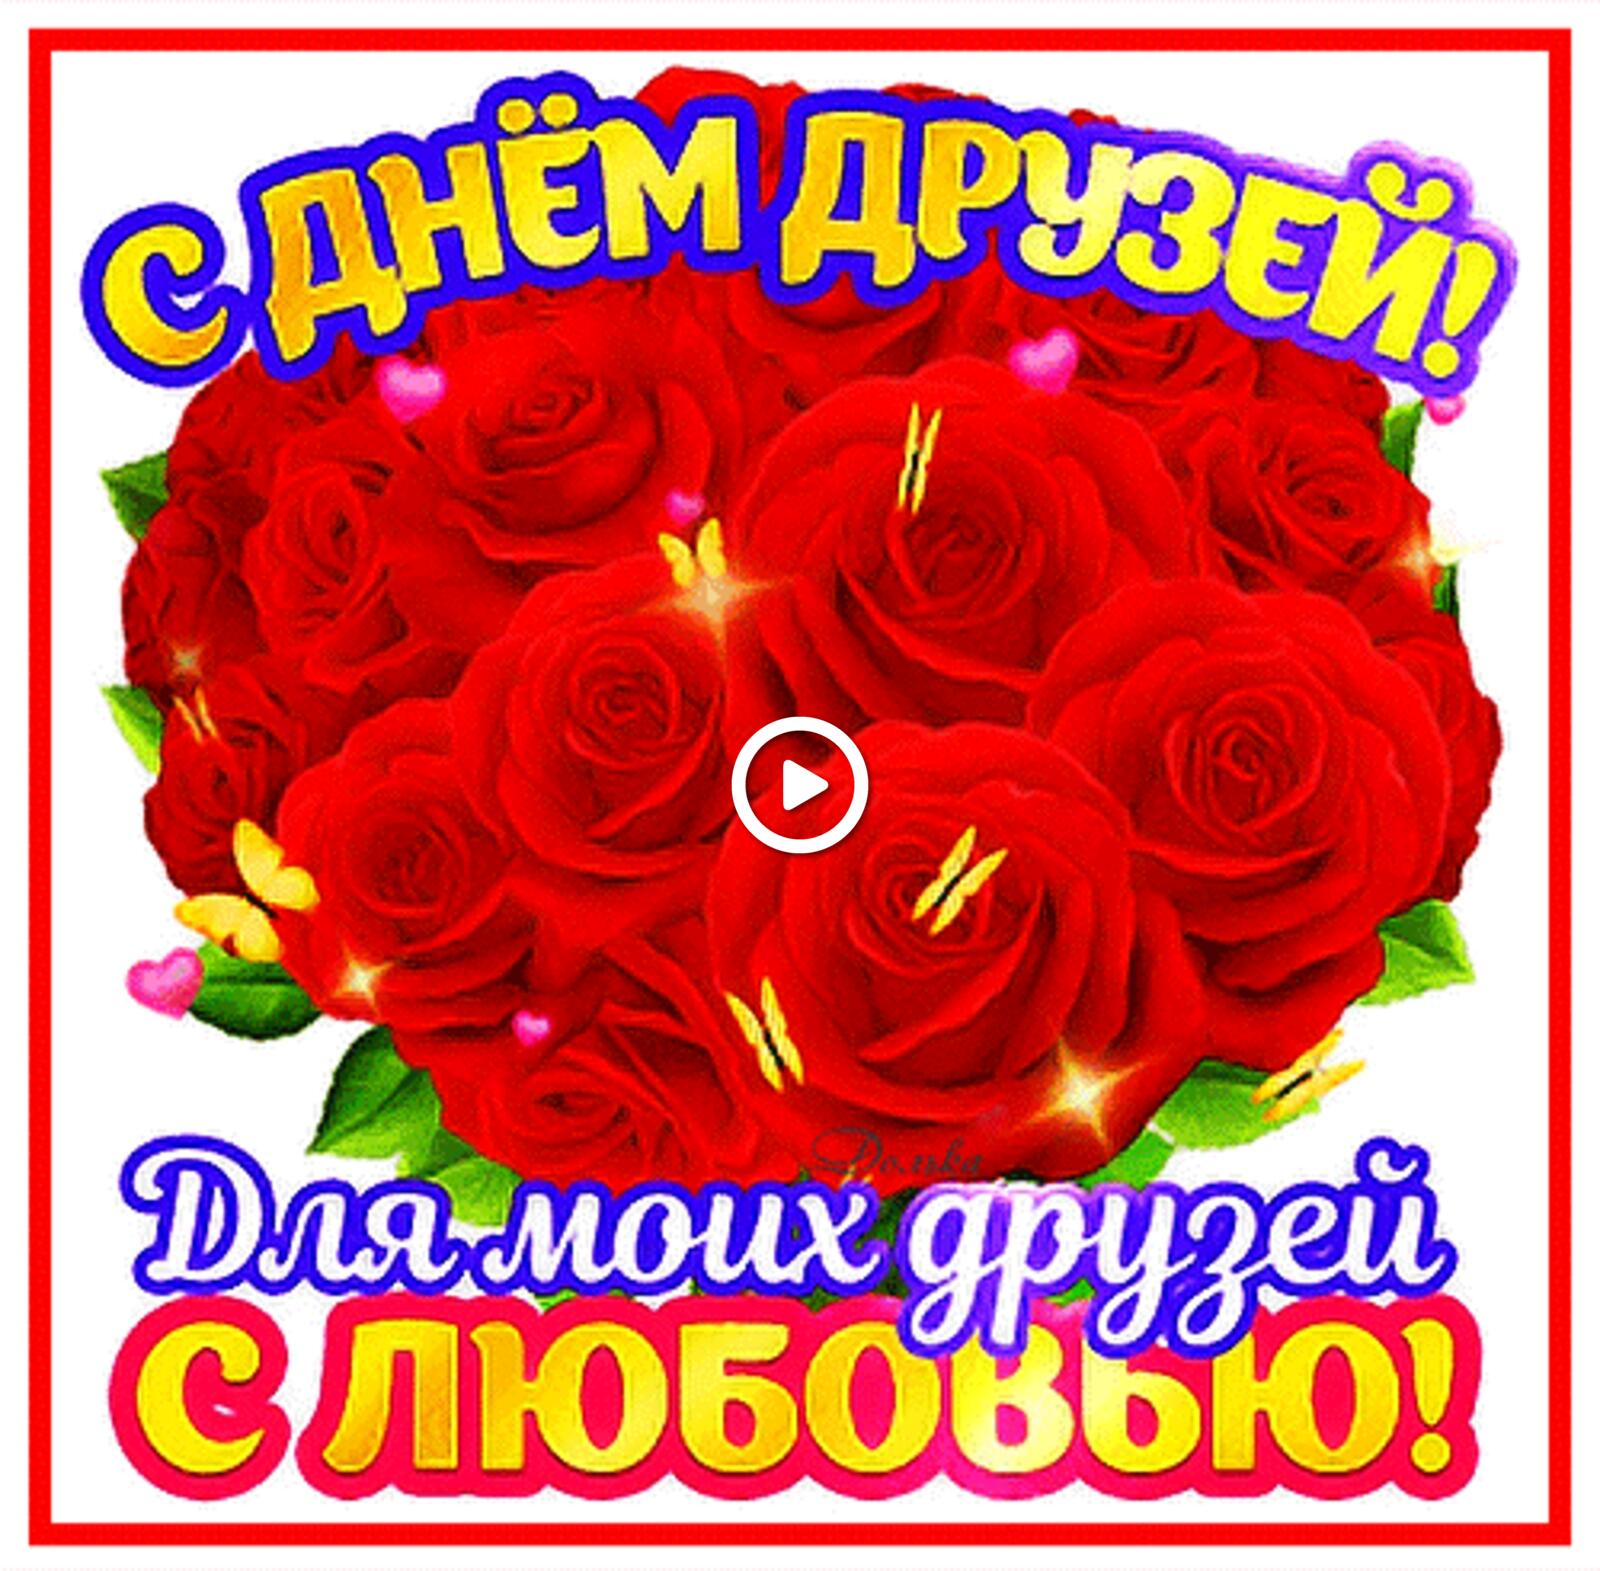 Congratulations on a friends day with a big bouquet of red roses